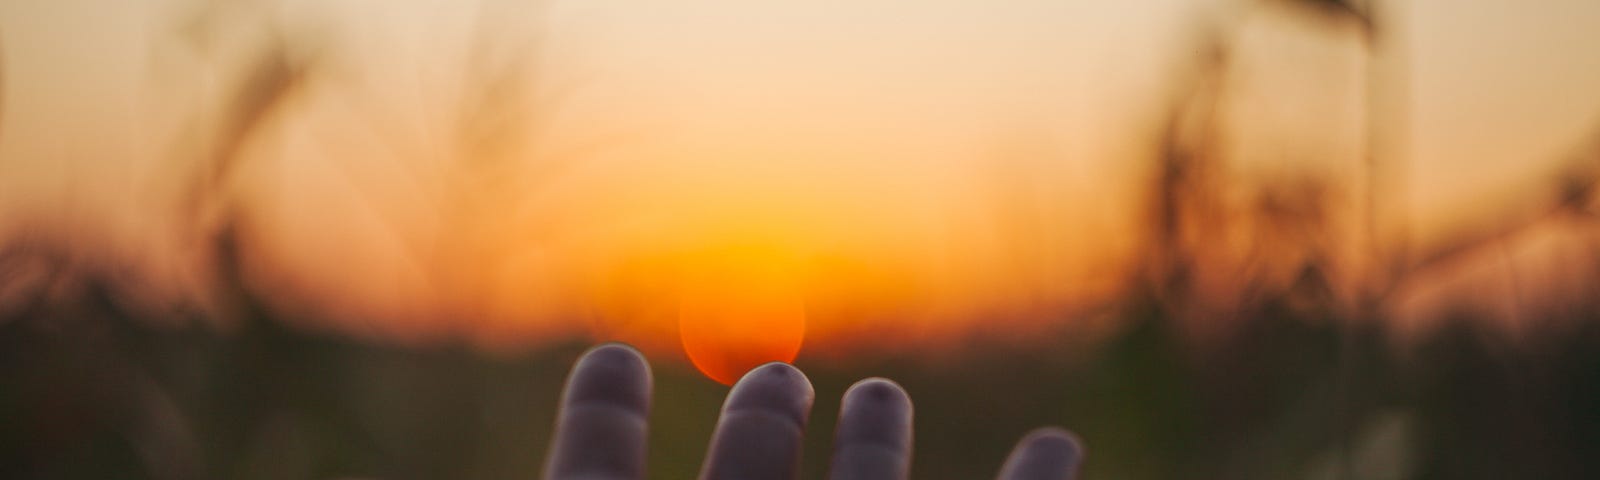 hand reaching into the sunset